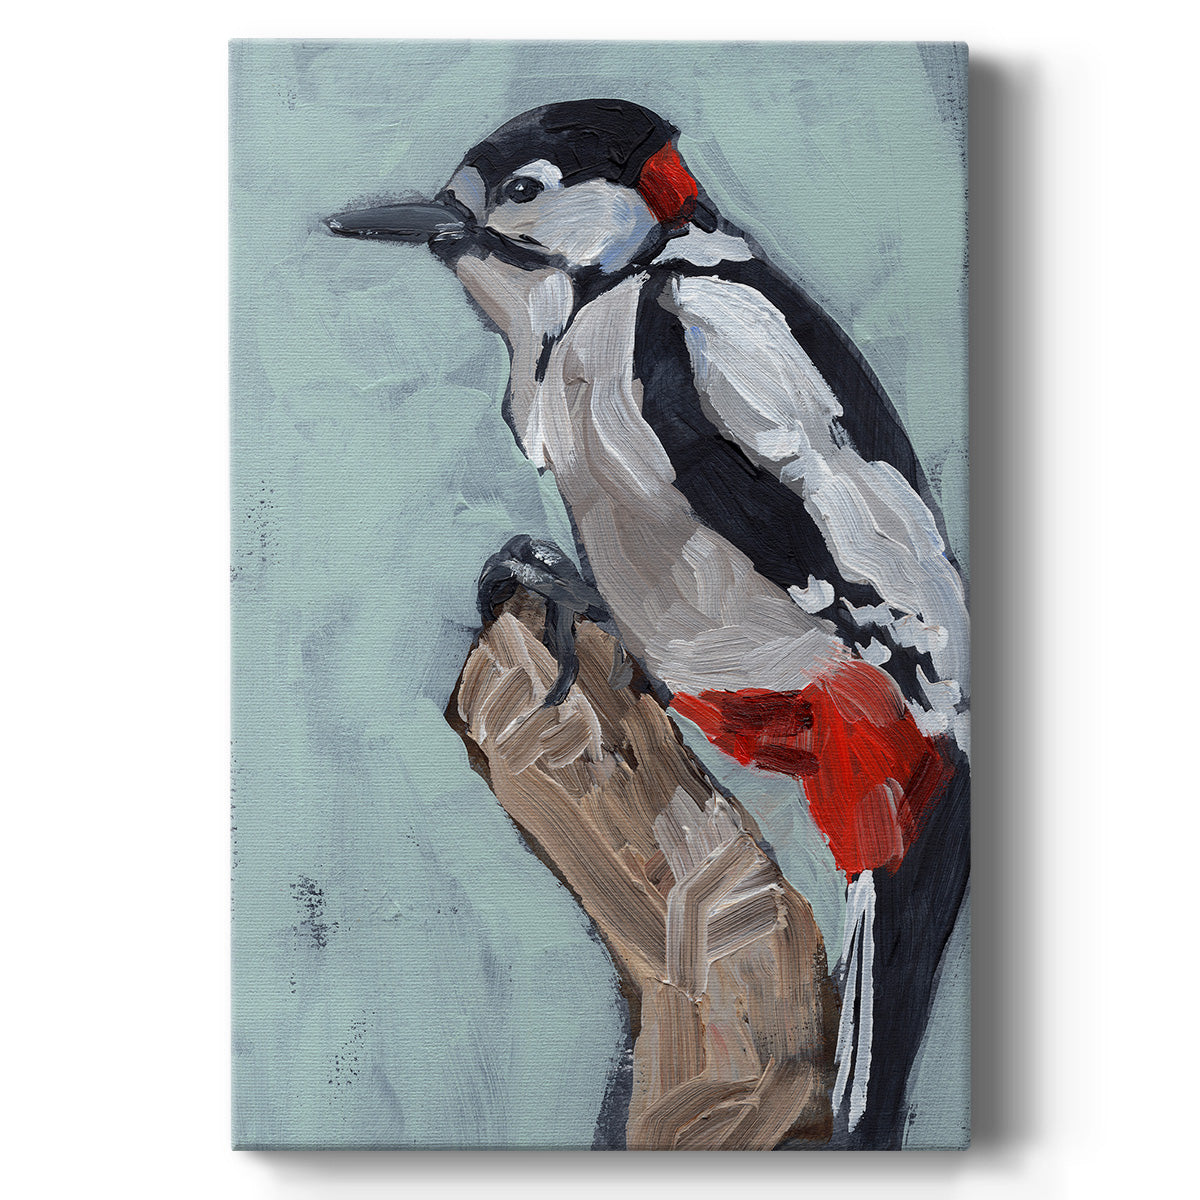 Woodpecker Paintstrokes I Premium Gallery Wrapped Canvas - Ready to Hang